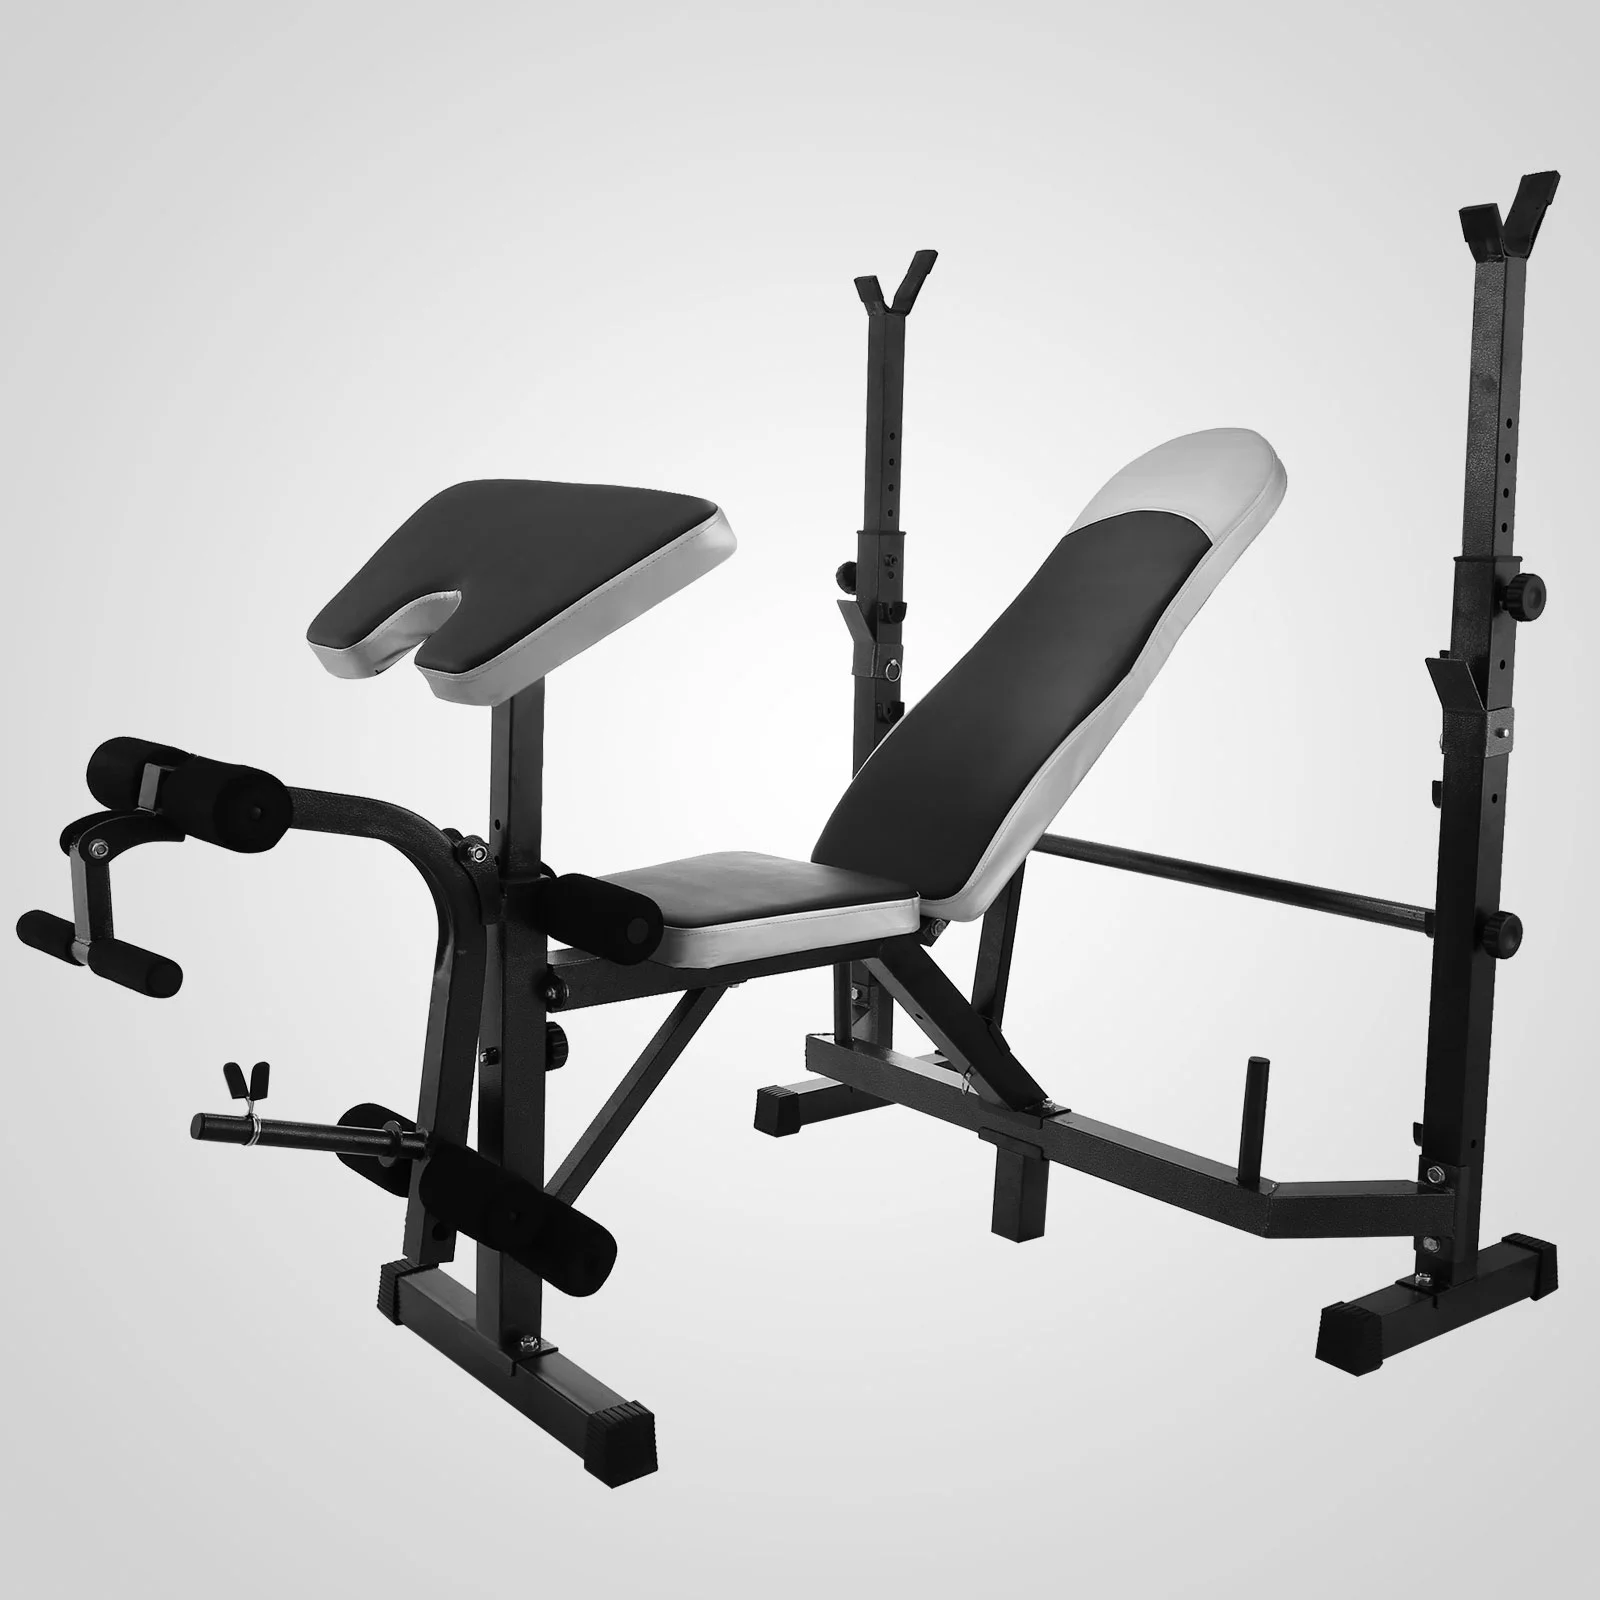 Weight Lifting Bench Adjustable 400kg Capacity Multi Station Weight Bench Buy Small Weight Benches